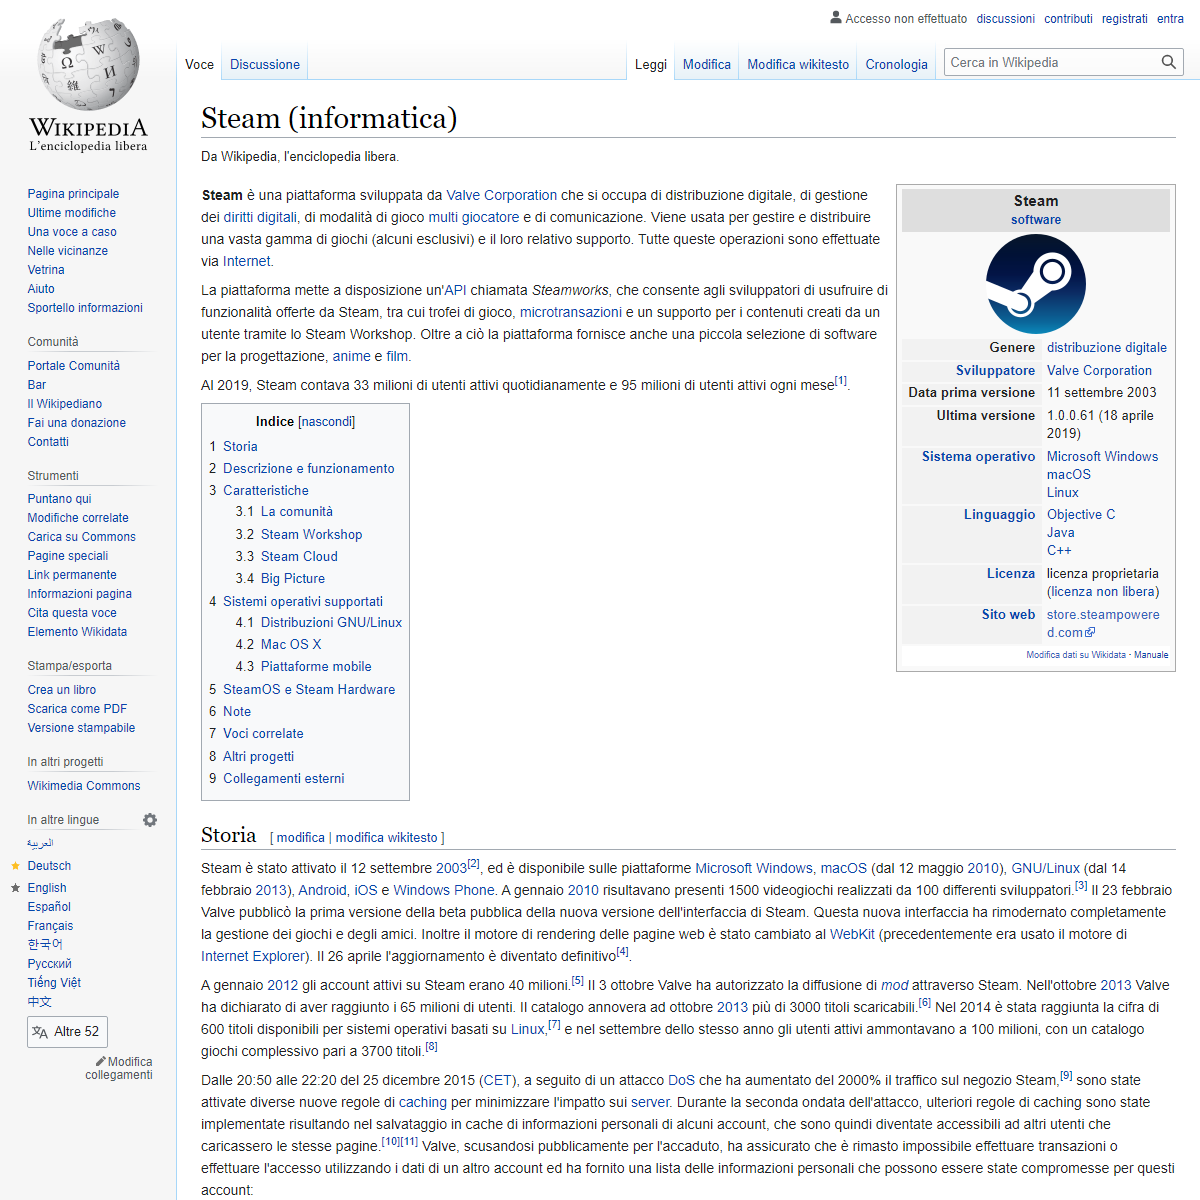 A complete backup of https://it.wikipedia.org/wiki/Steam_(informatica)